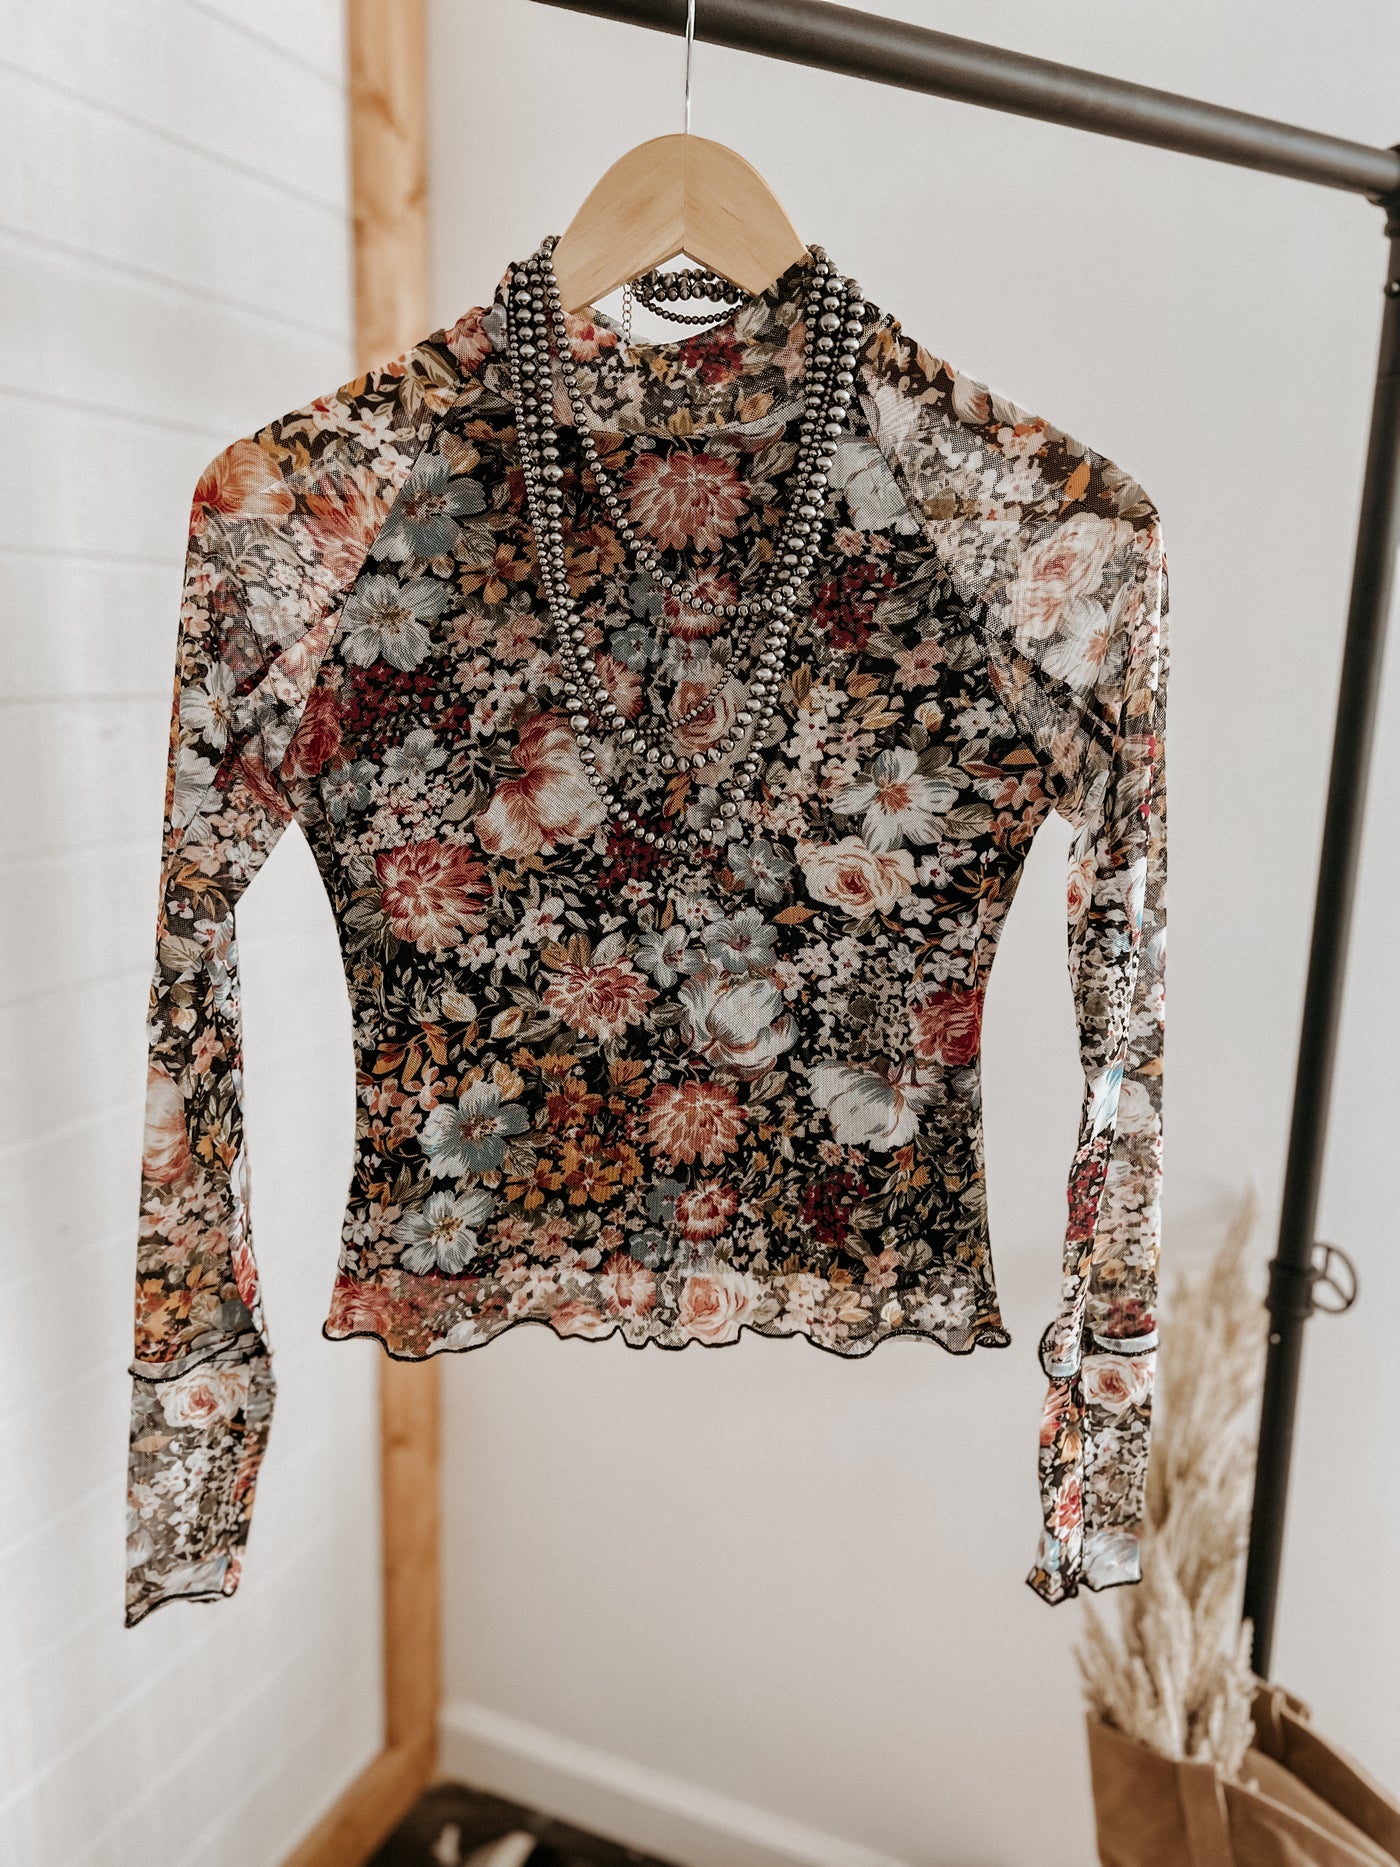 The Floral Mesh Top